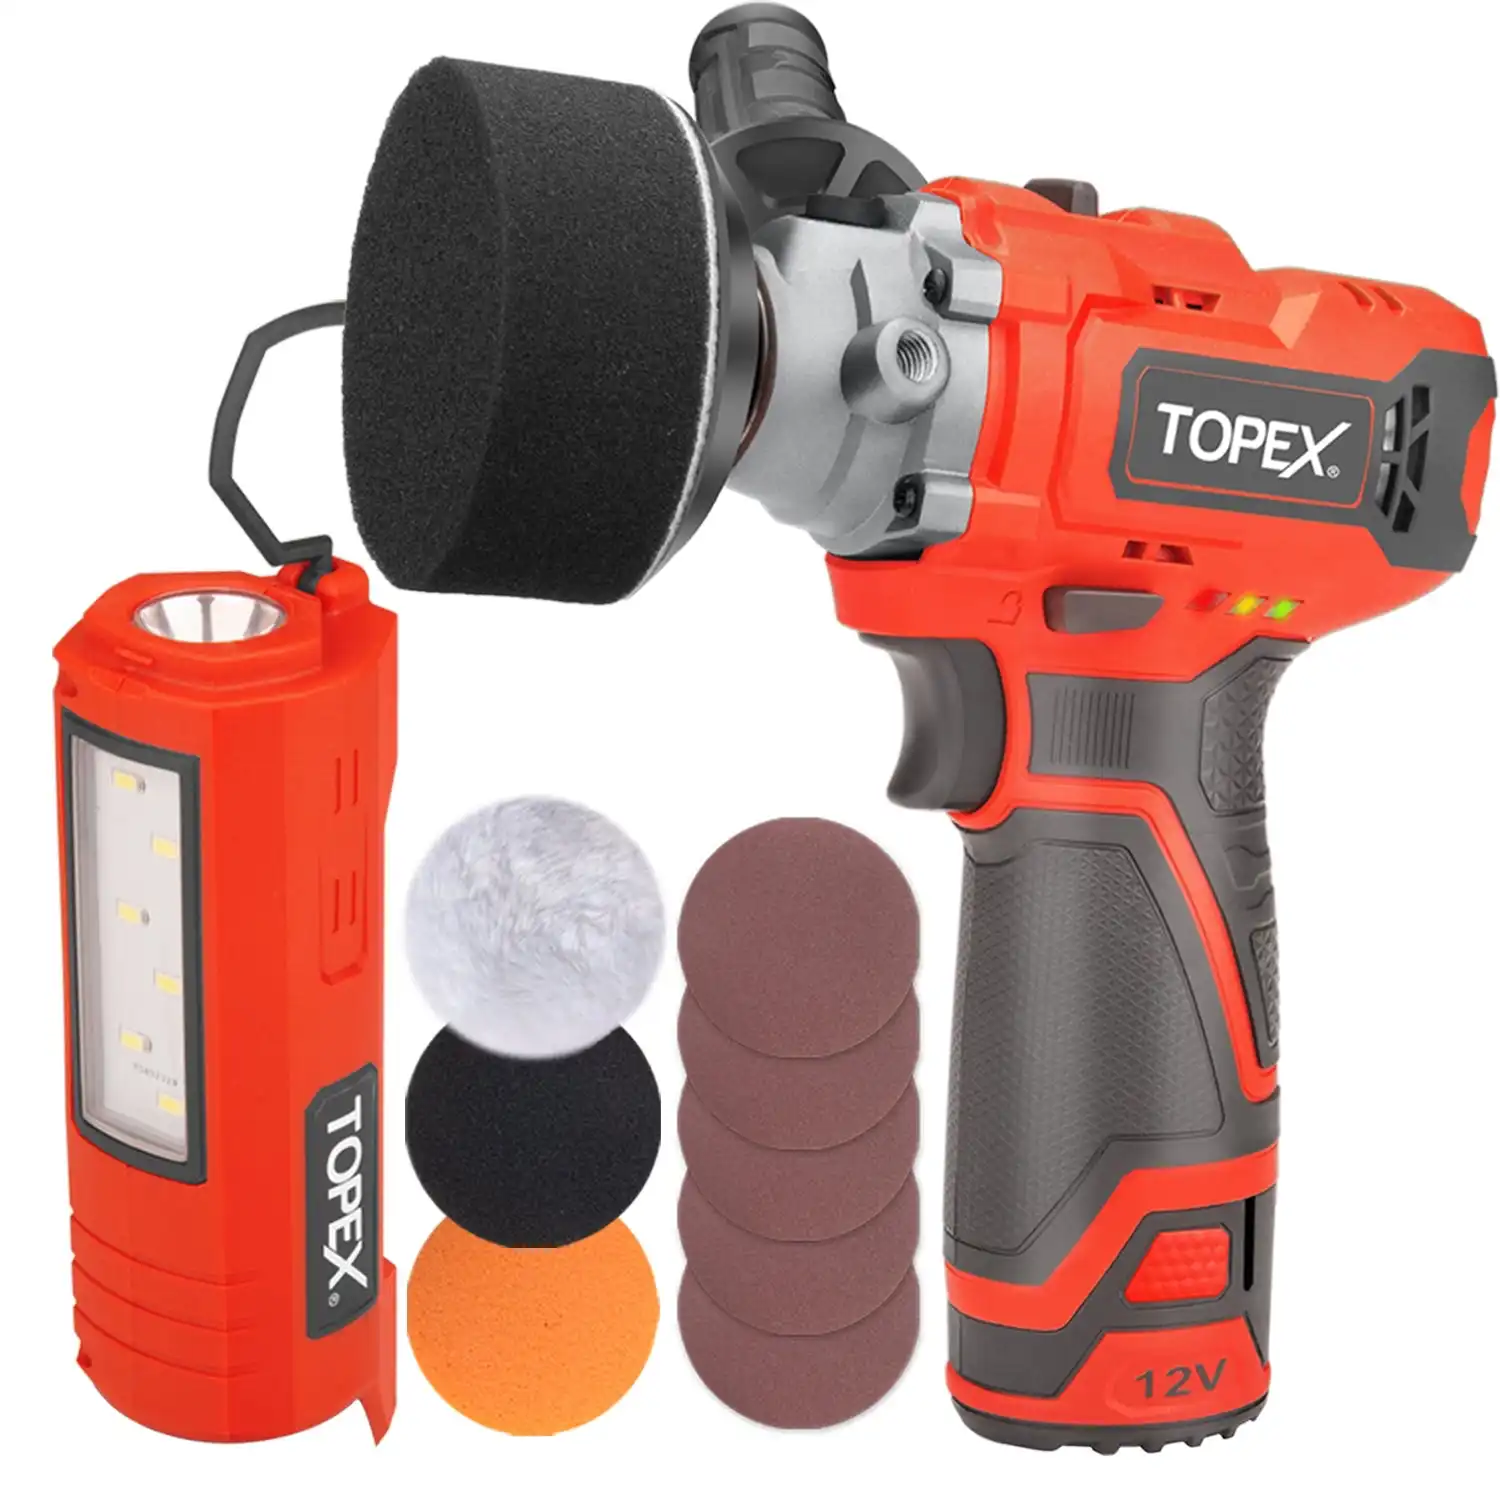 Topex 12V Cordless Polisher Lithium-Ion LED Torch w/ Battery & Charger